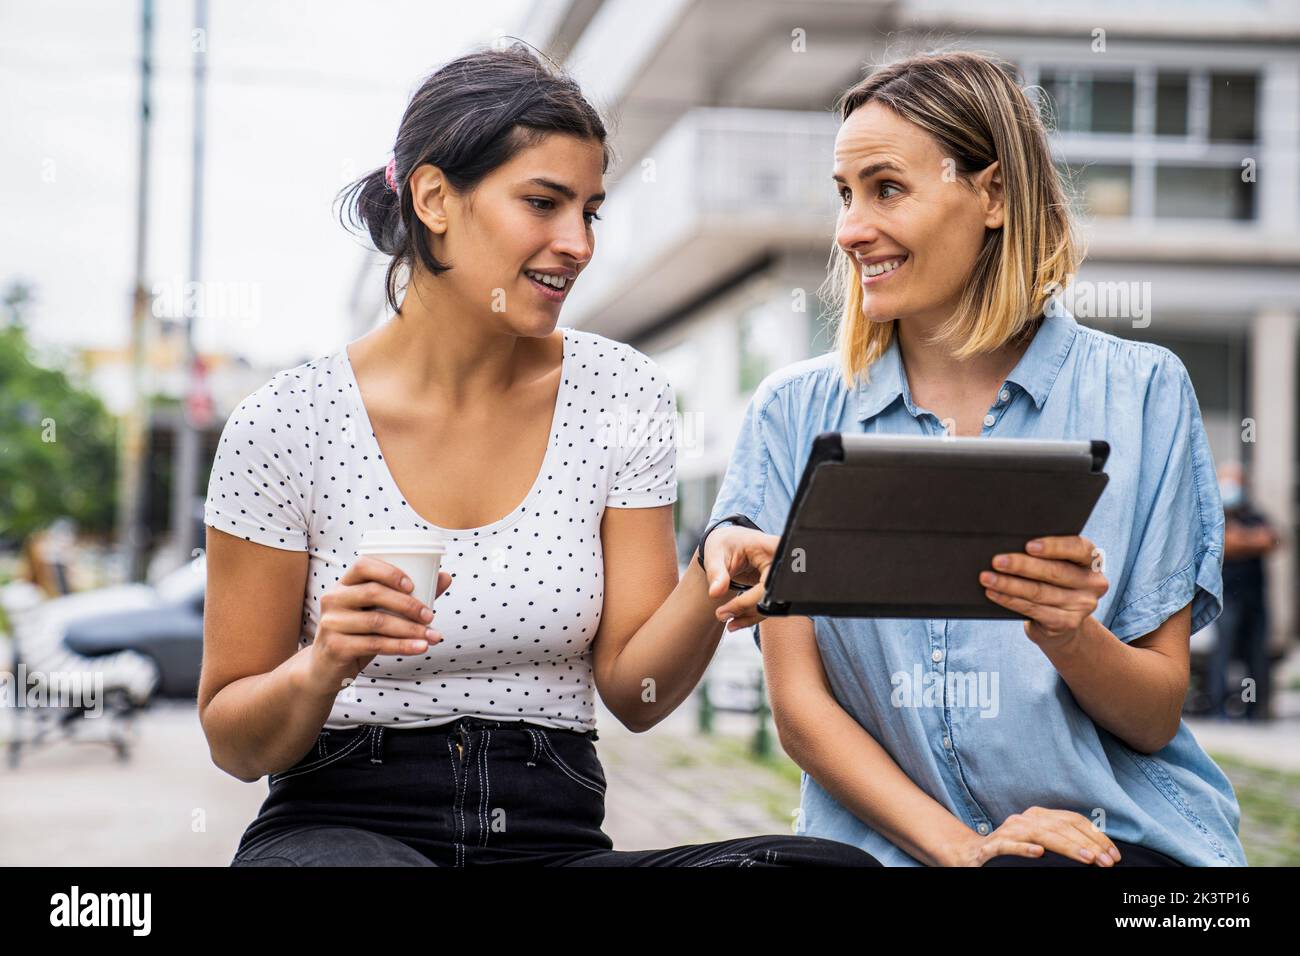 Front view mid-shot of two female co-workers talking about work matters while working outdoors Stock Photo